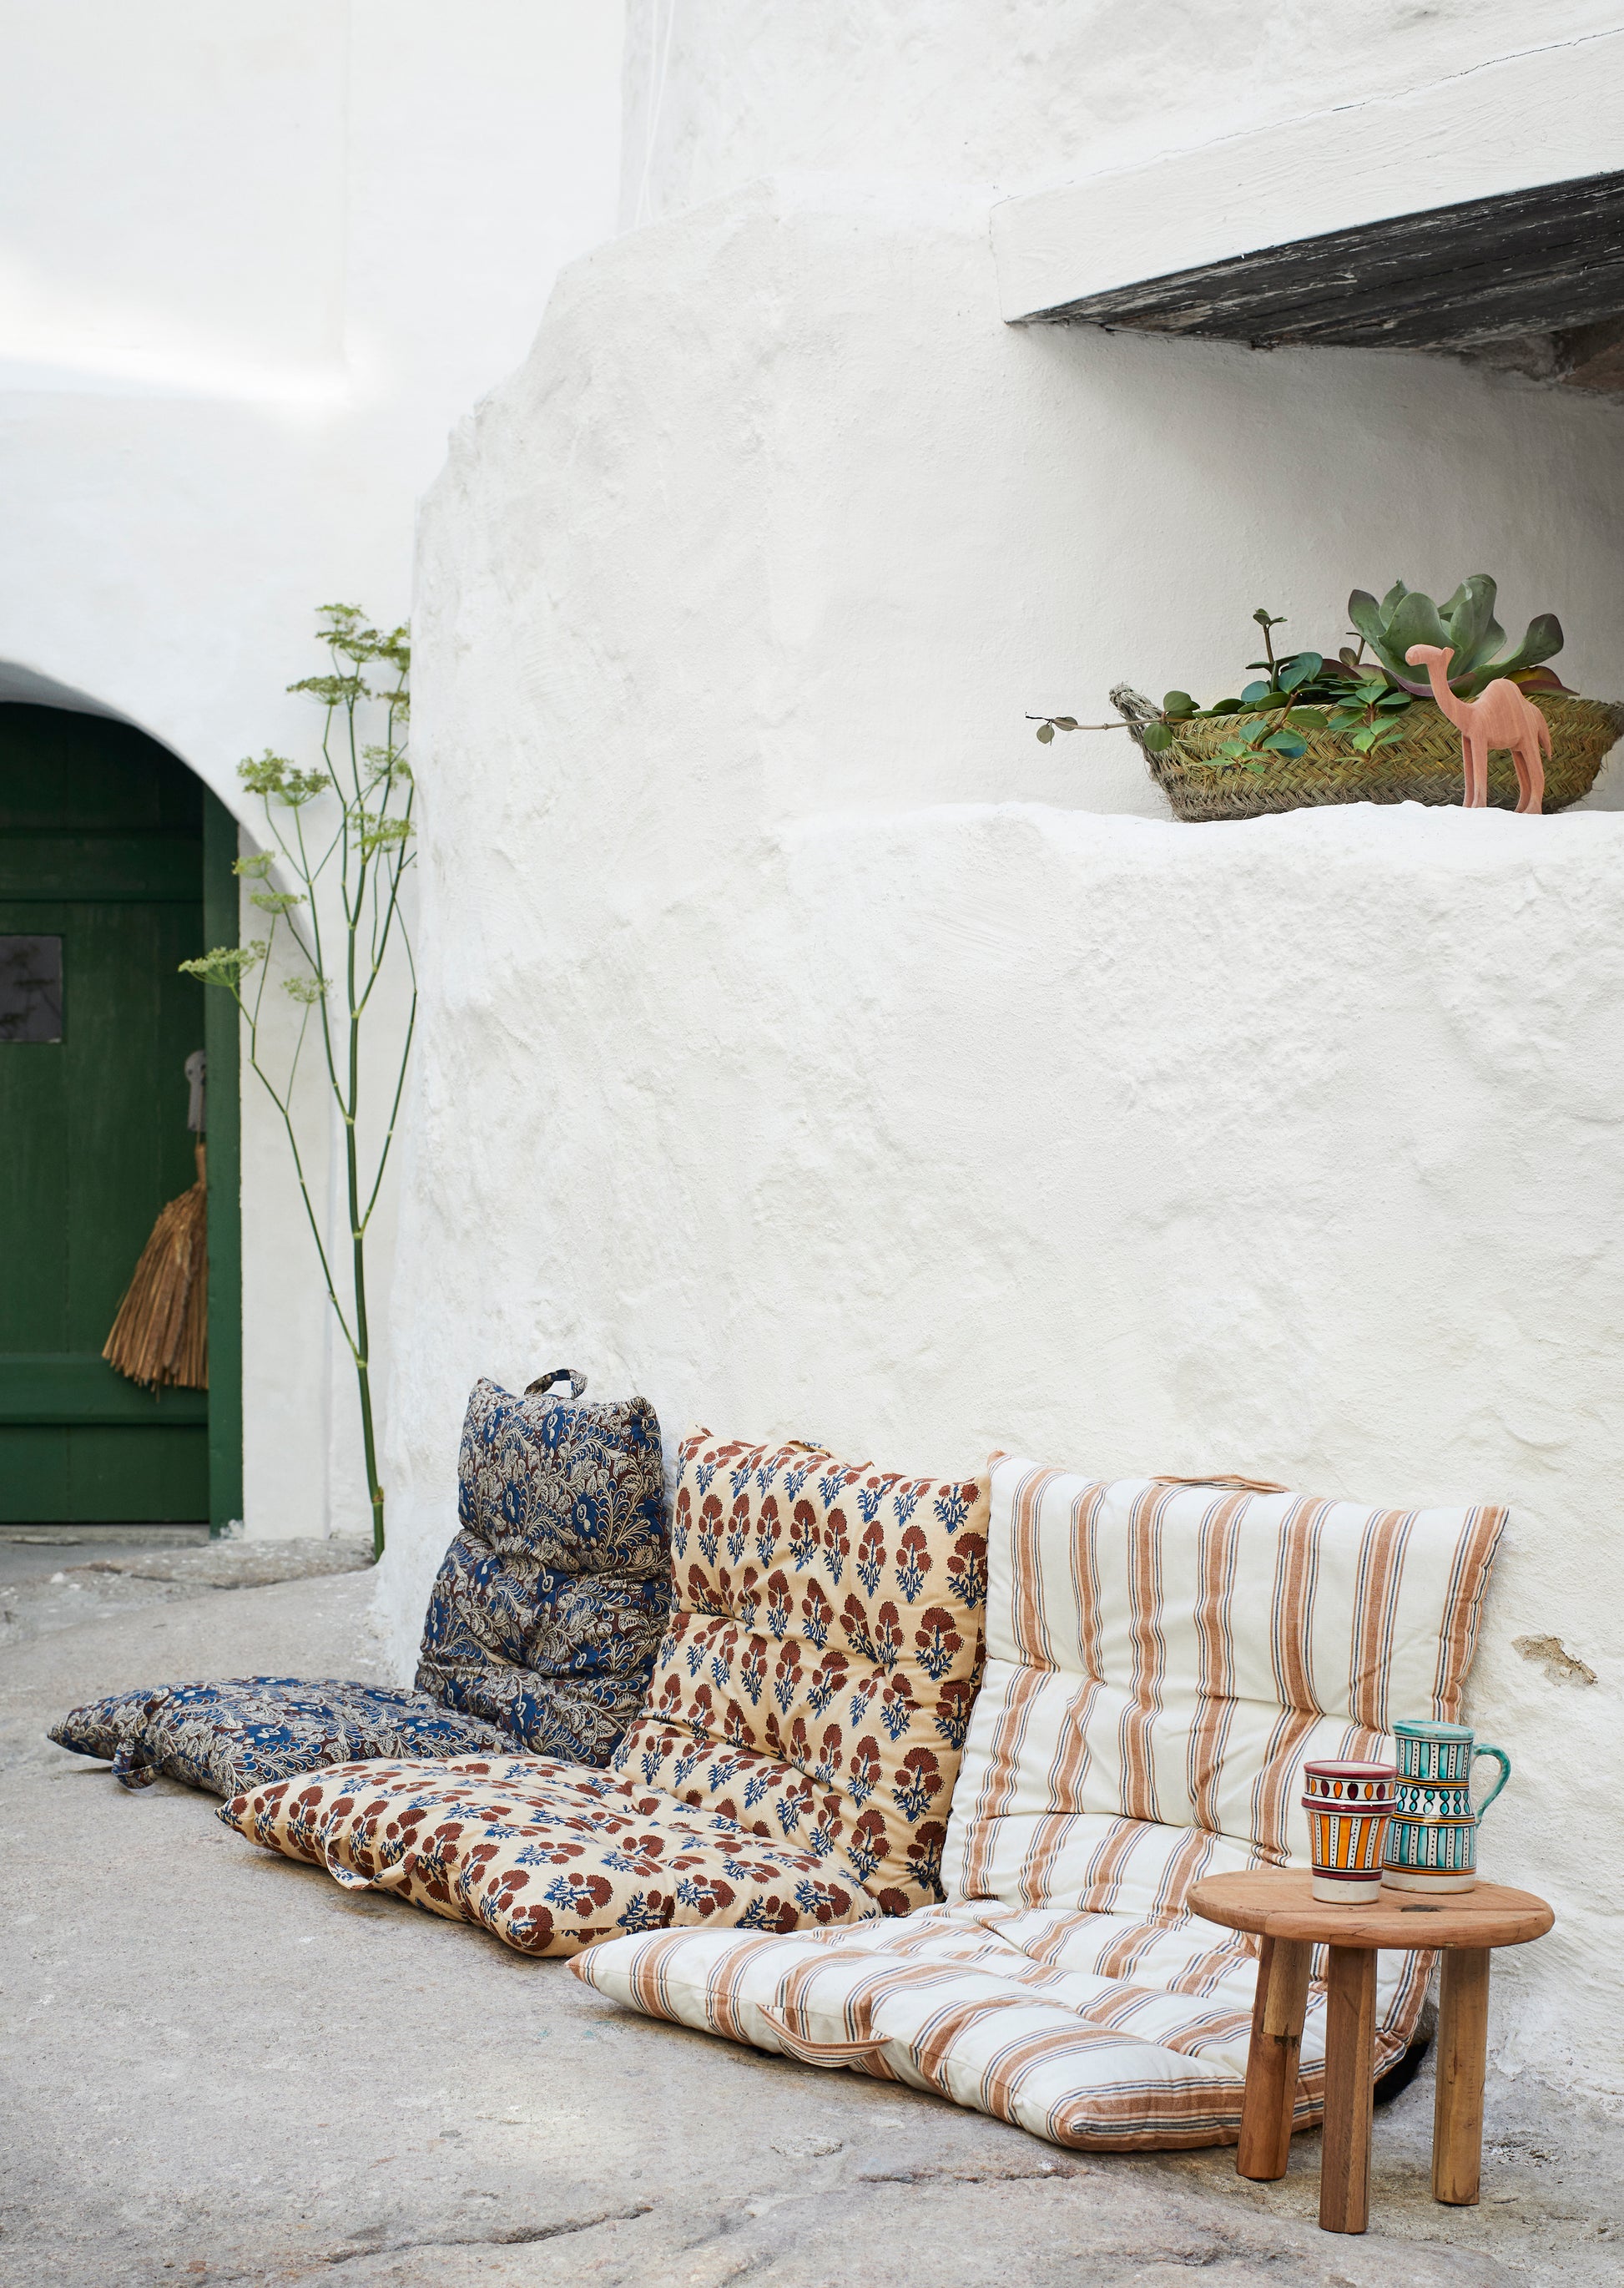 three cushion seats, each in a different print, sitting along a white wall outdoors, with a small wooden table next to them, with a painted cup and jug on top of it